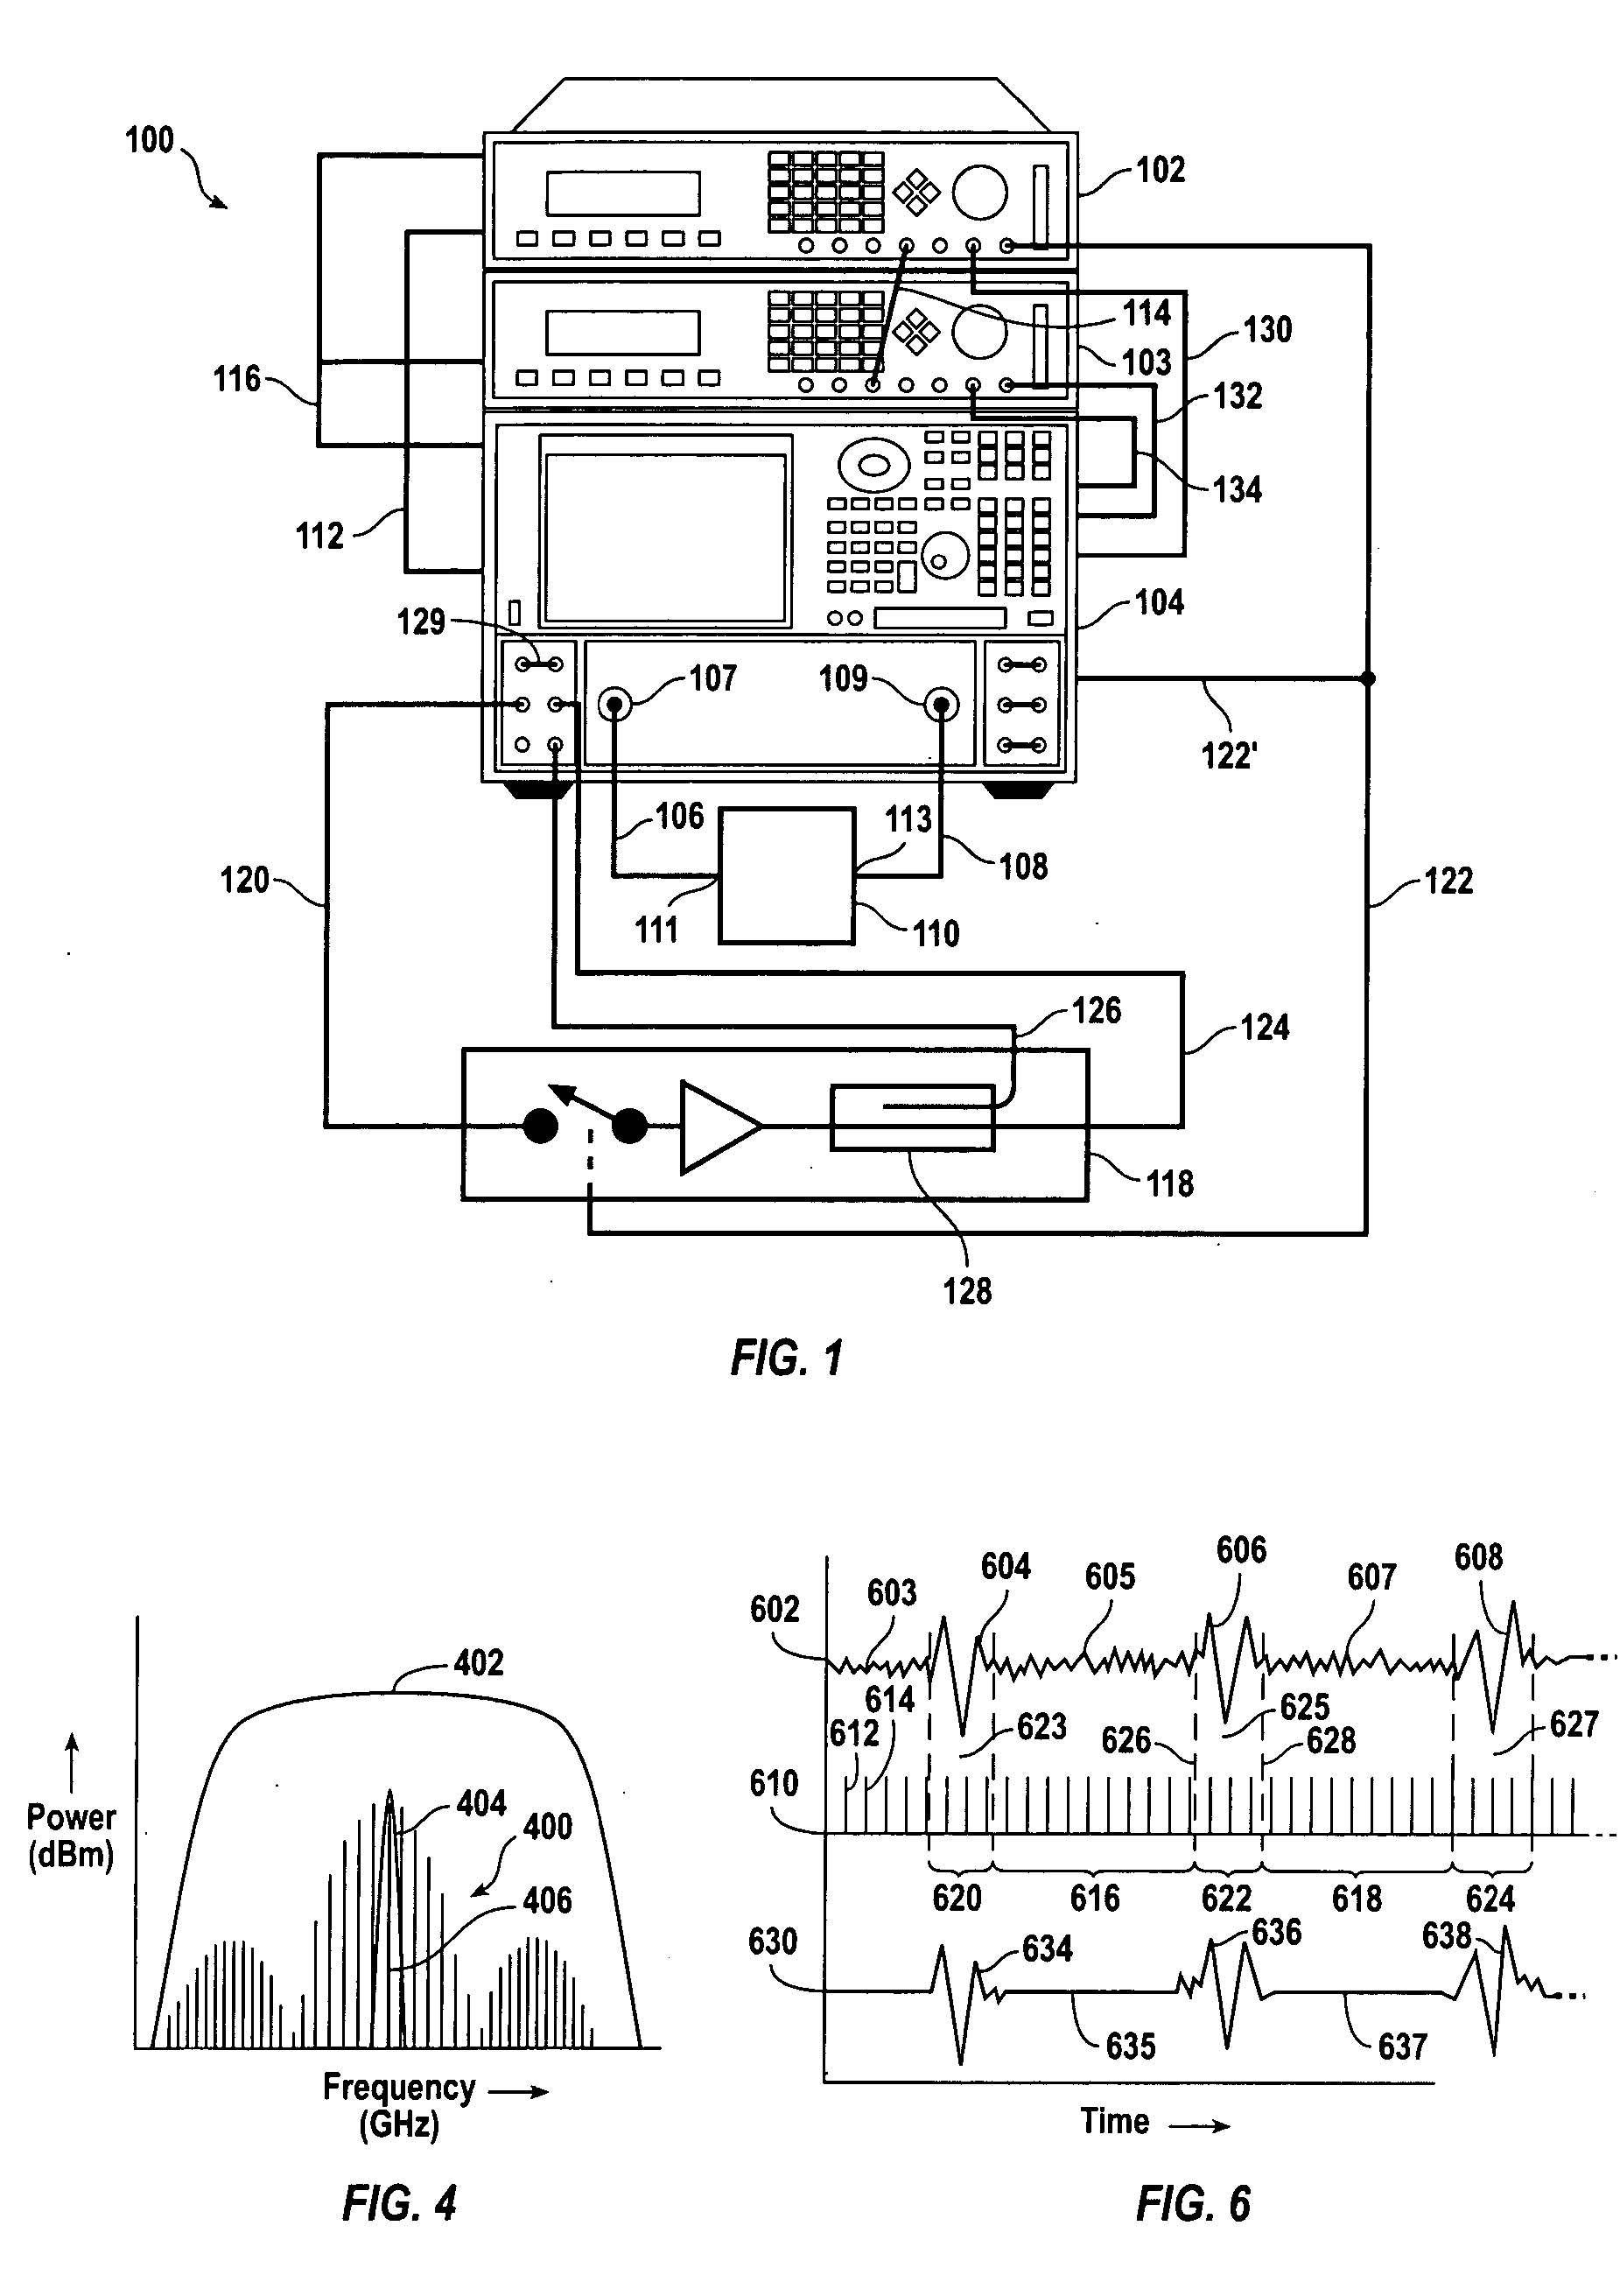 Triggered narrow-band method for making pulsed-rf networking measurements